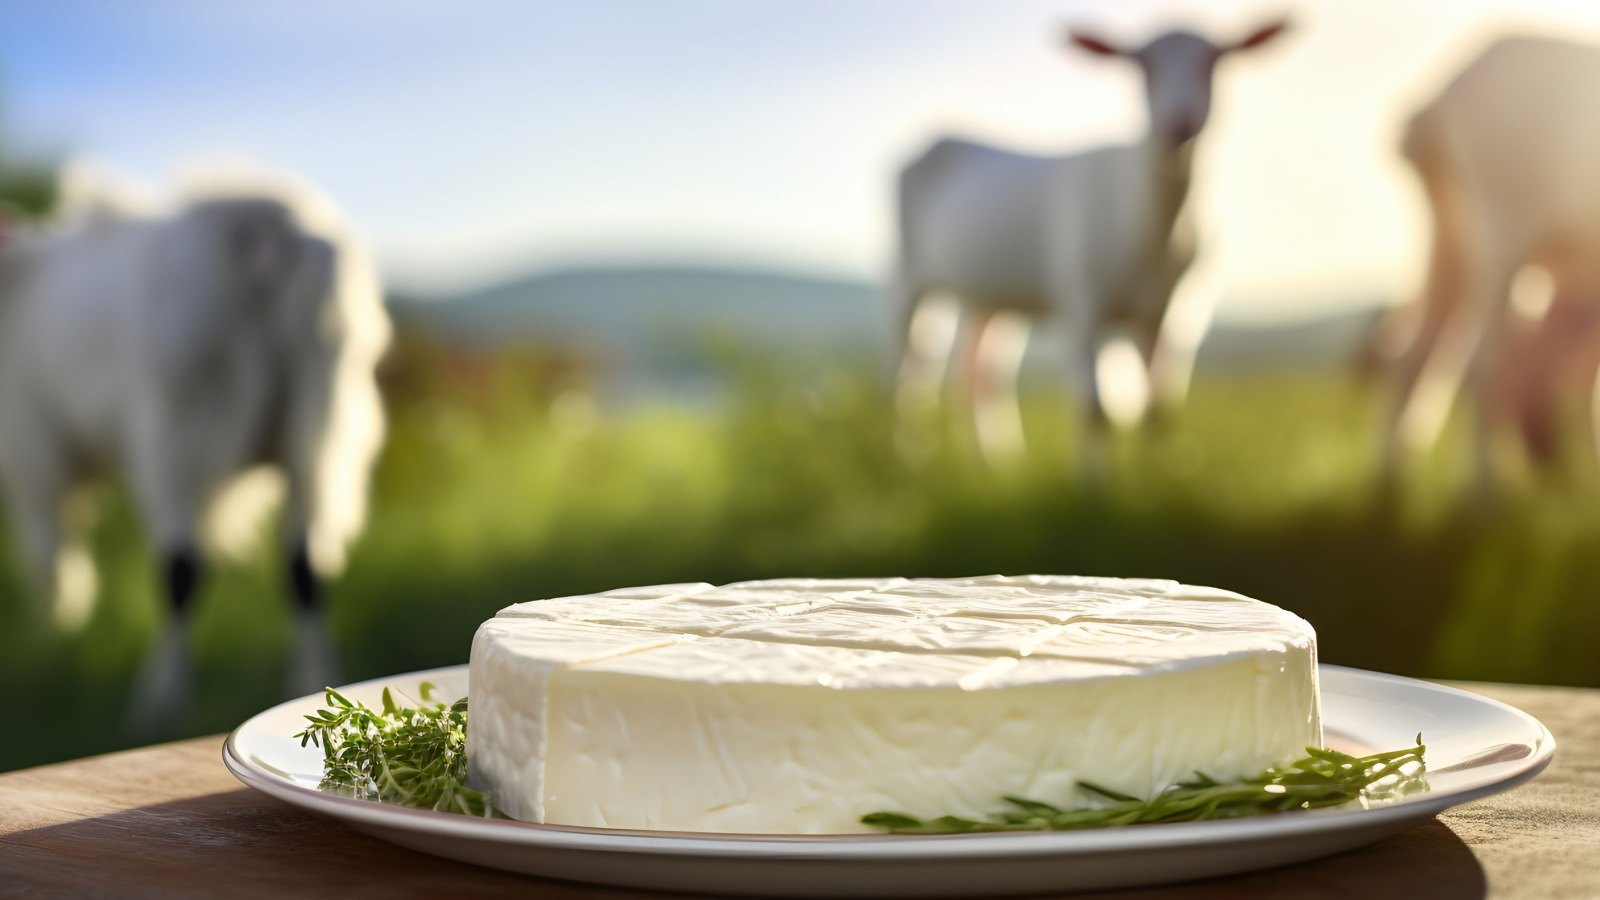 Goat cheese: Benefits and side effects